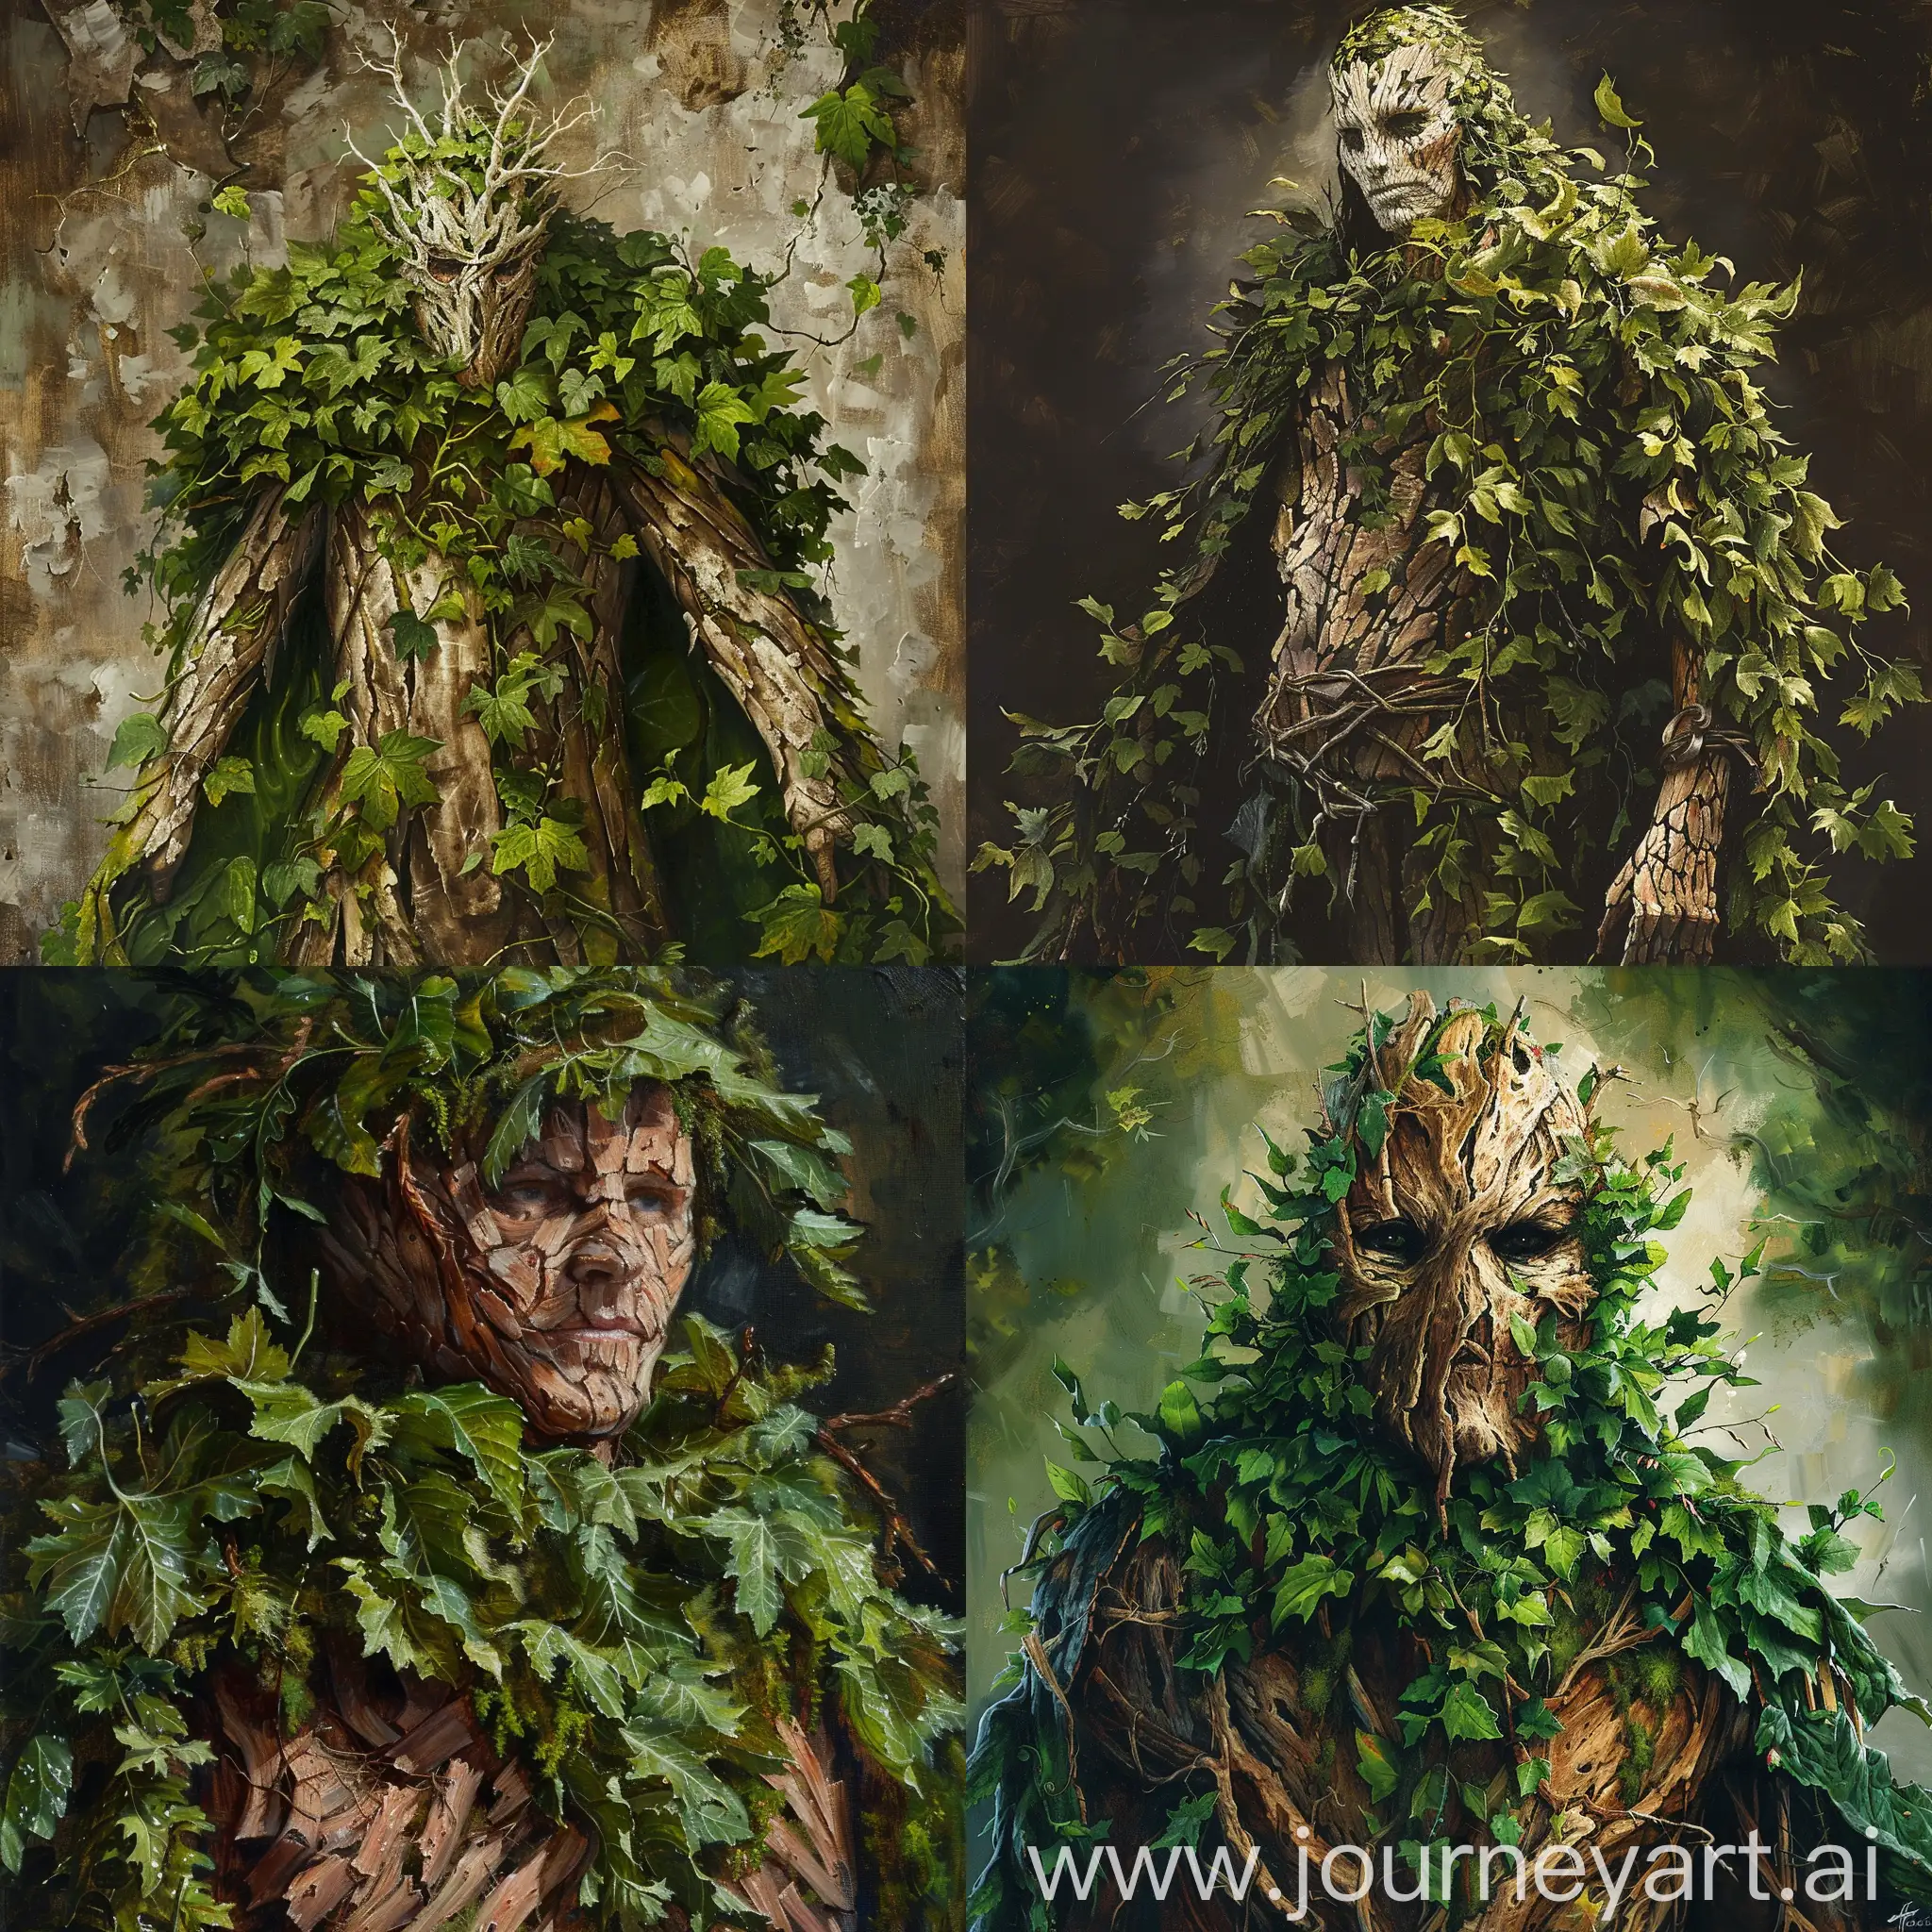 Warrior of the forest with bark skin and green battle robes made of foliage.
In the art style of Terese Nielsen oil painting.